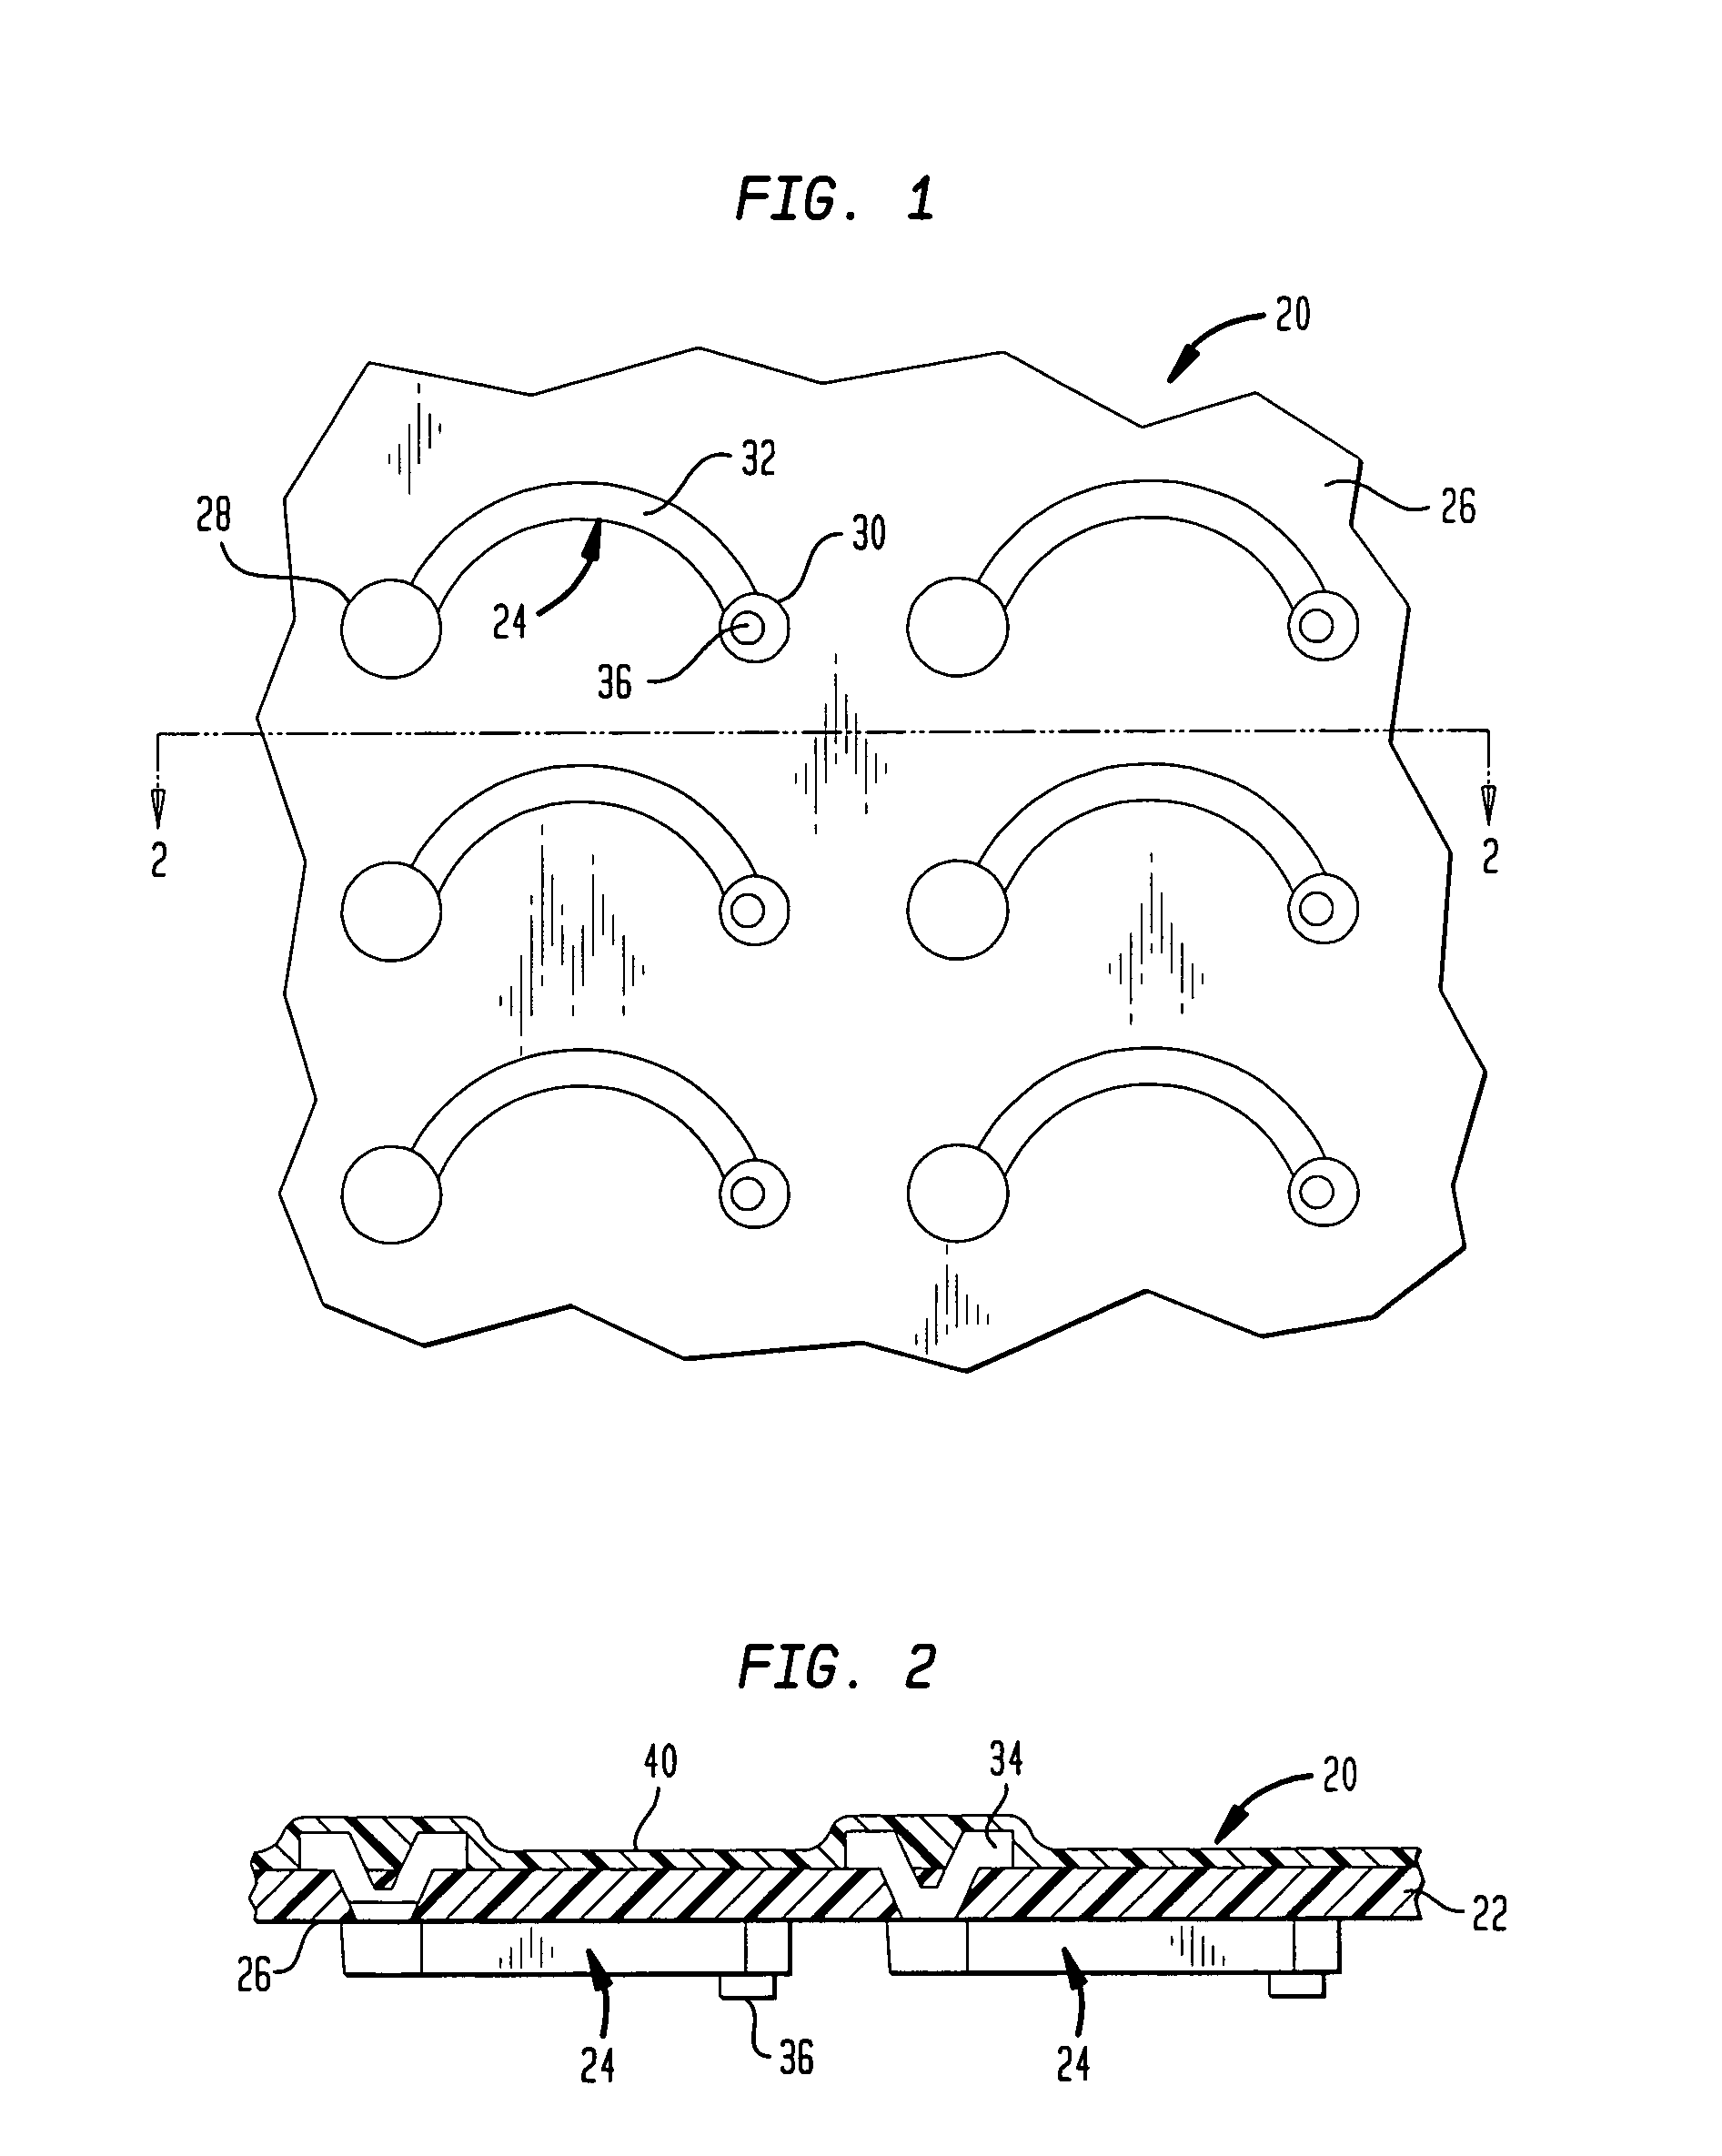 Method of making components with releasable leads